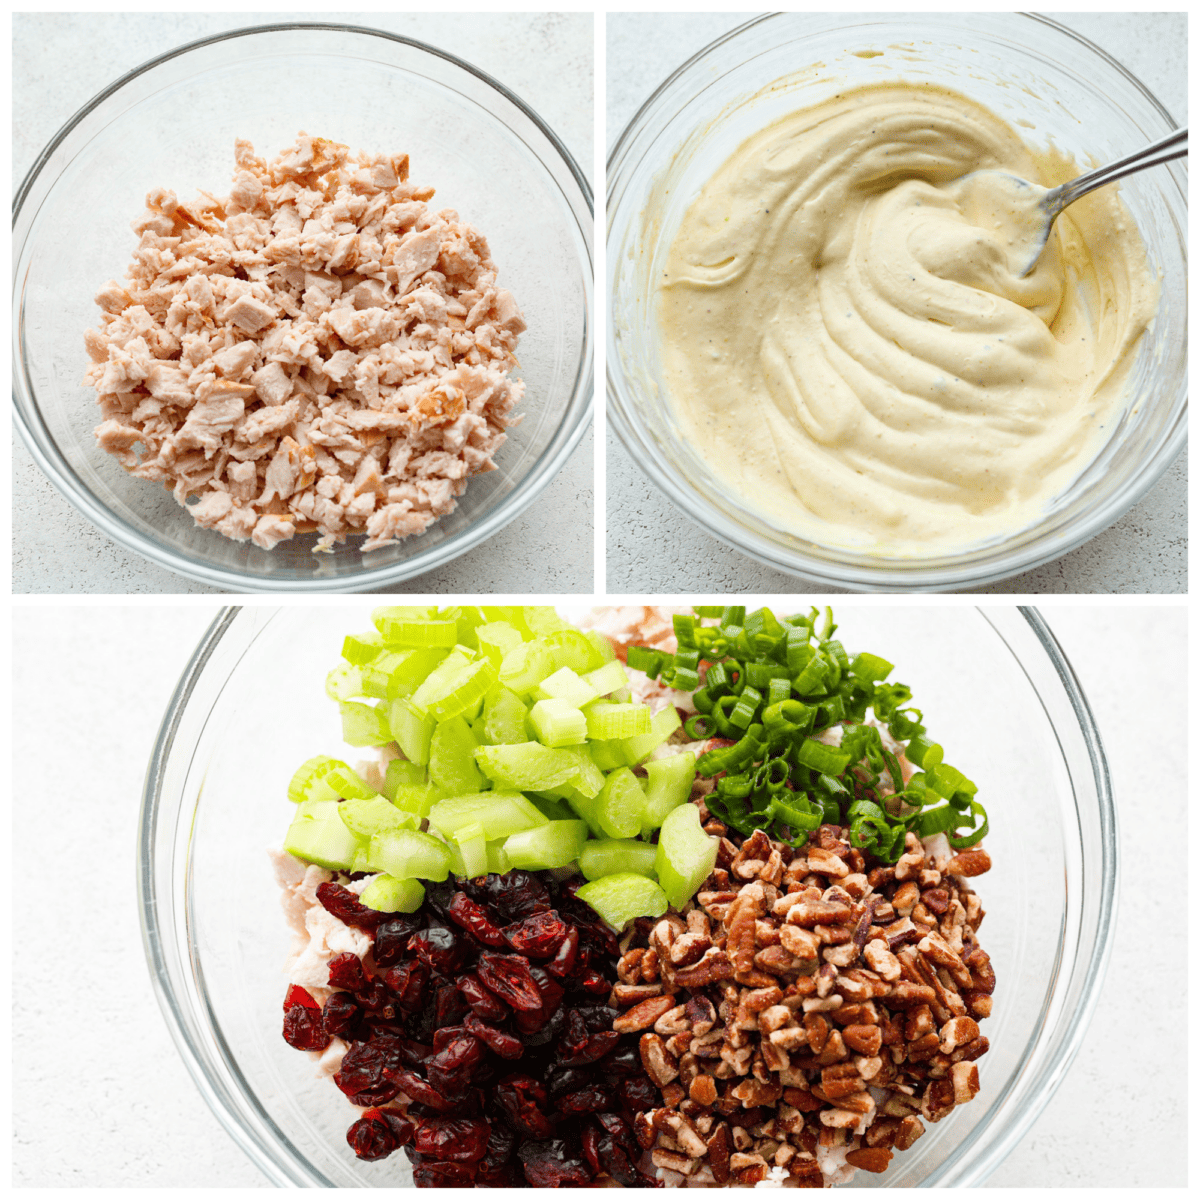 3-photo collage of the chopped turkey, mayo mixture, and mix-ins being combined.